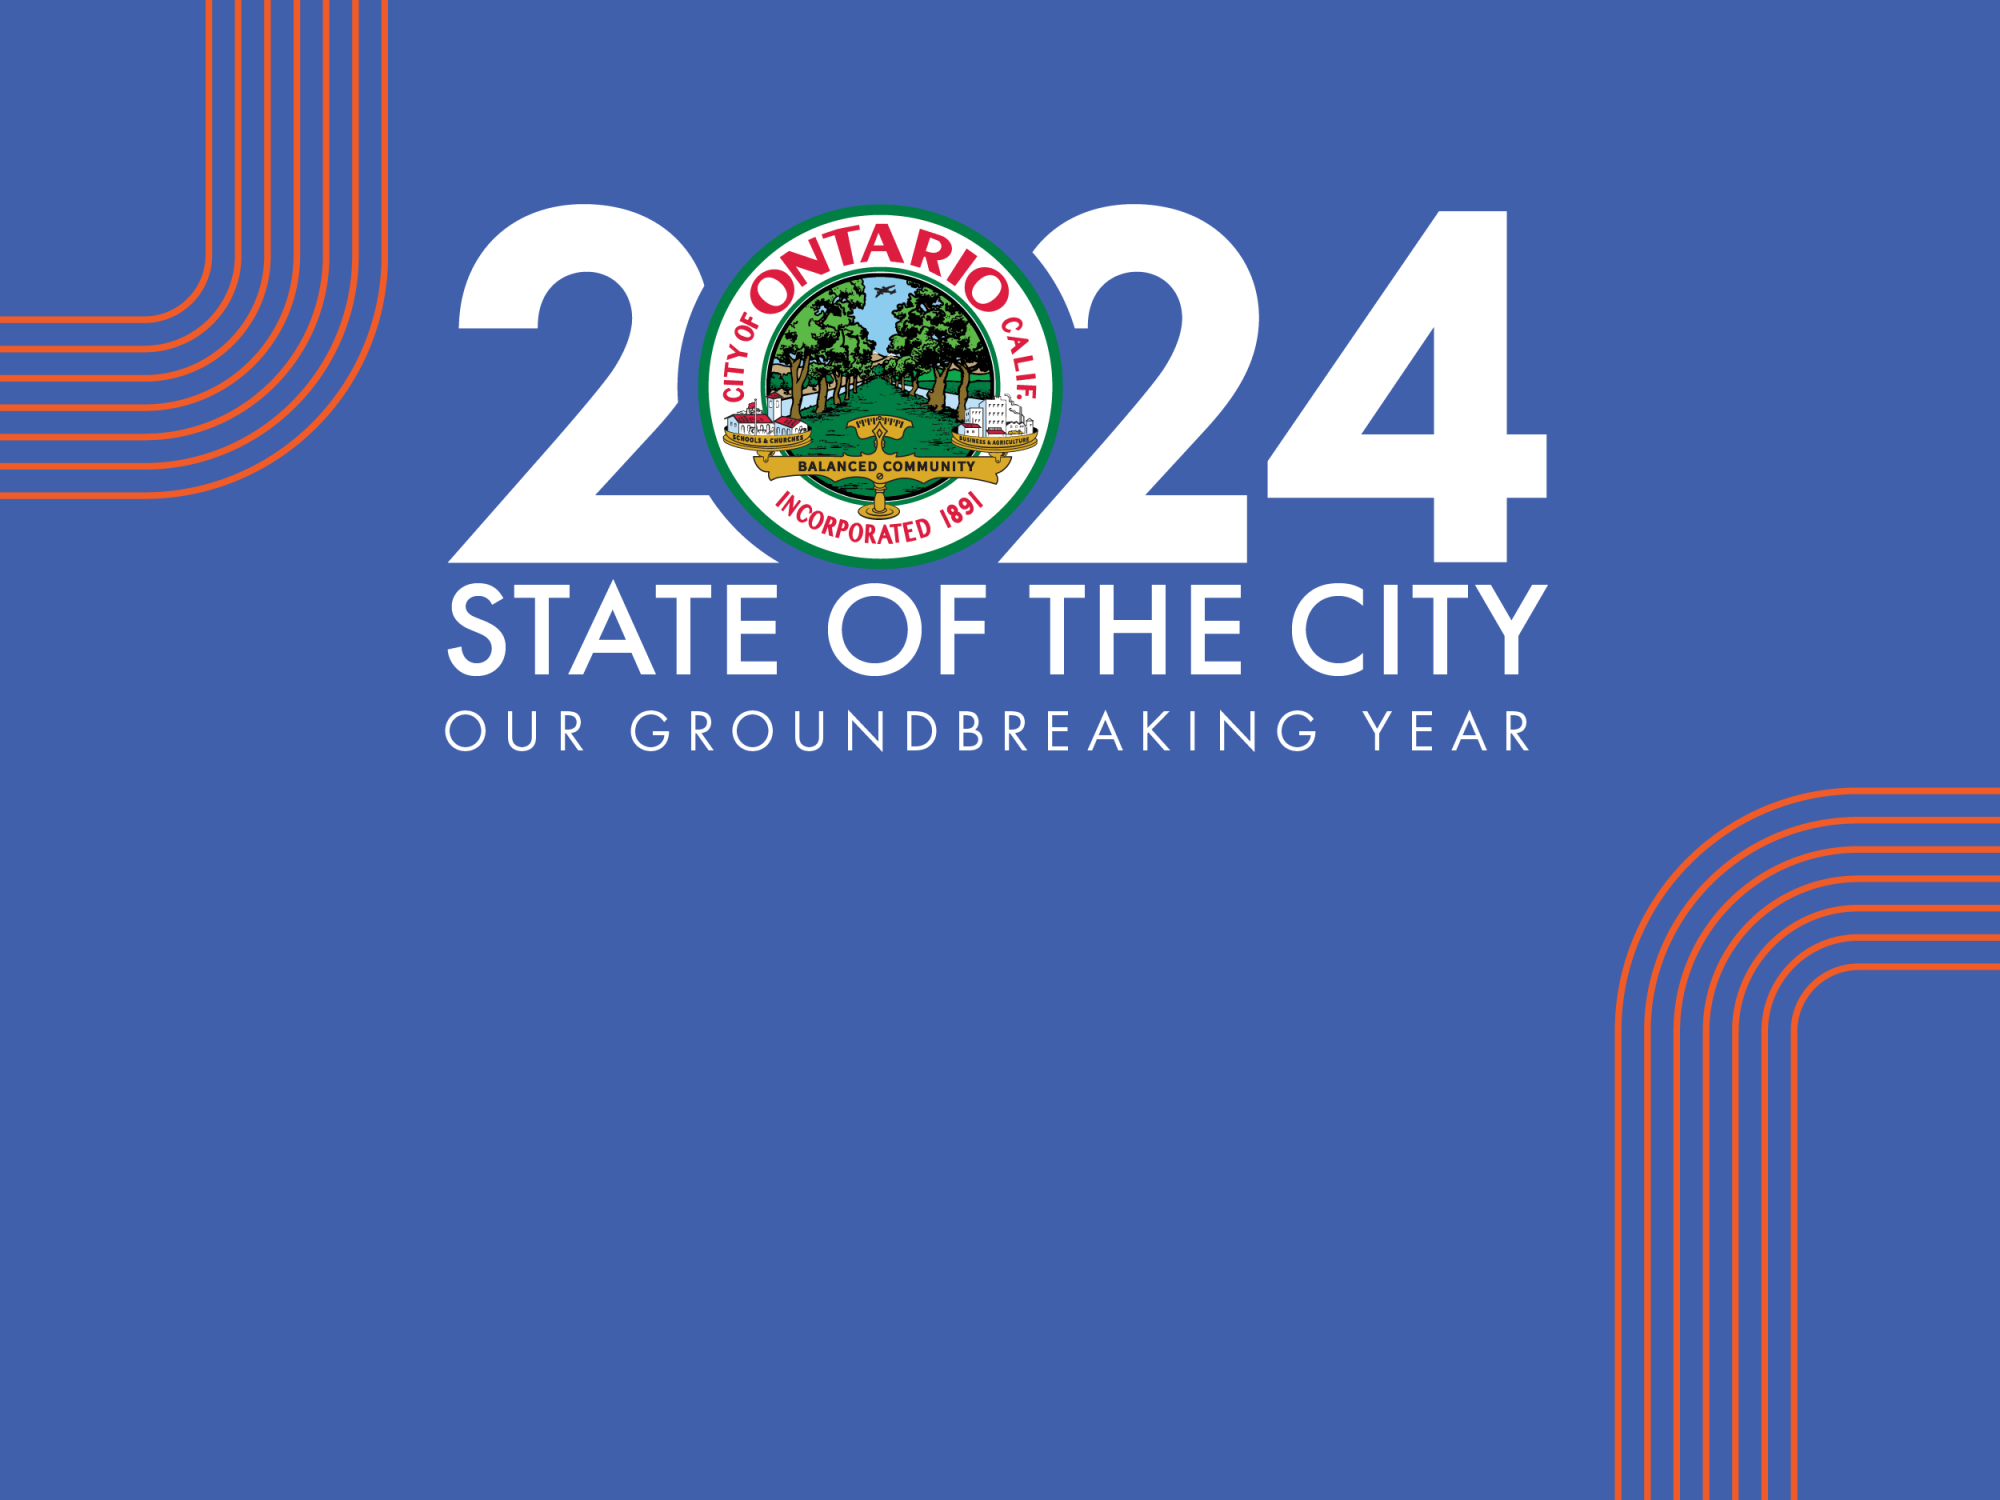 Blue background with text: "2024 State of the City Our Groundbreaking Year"